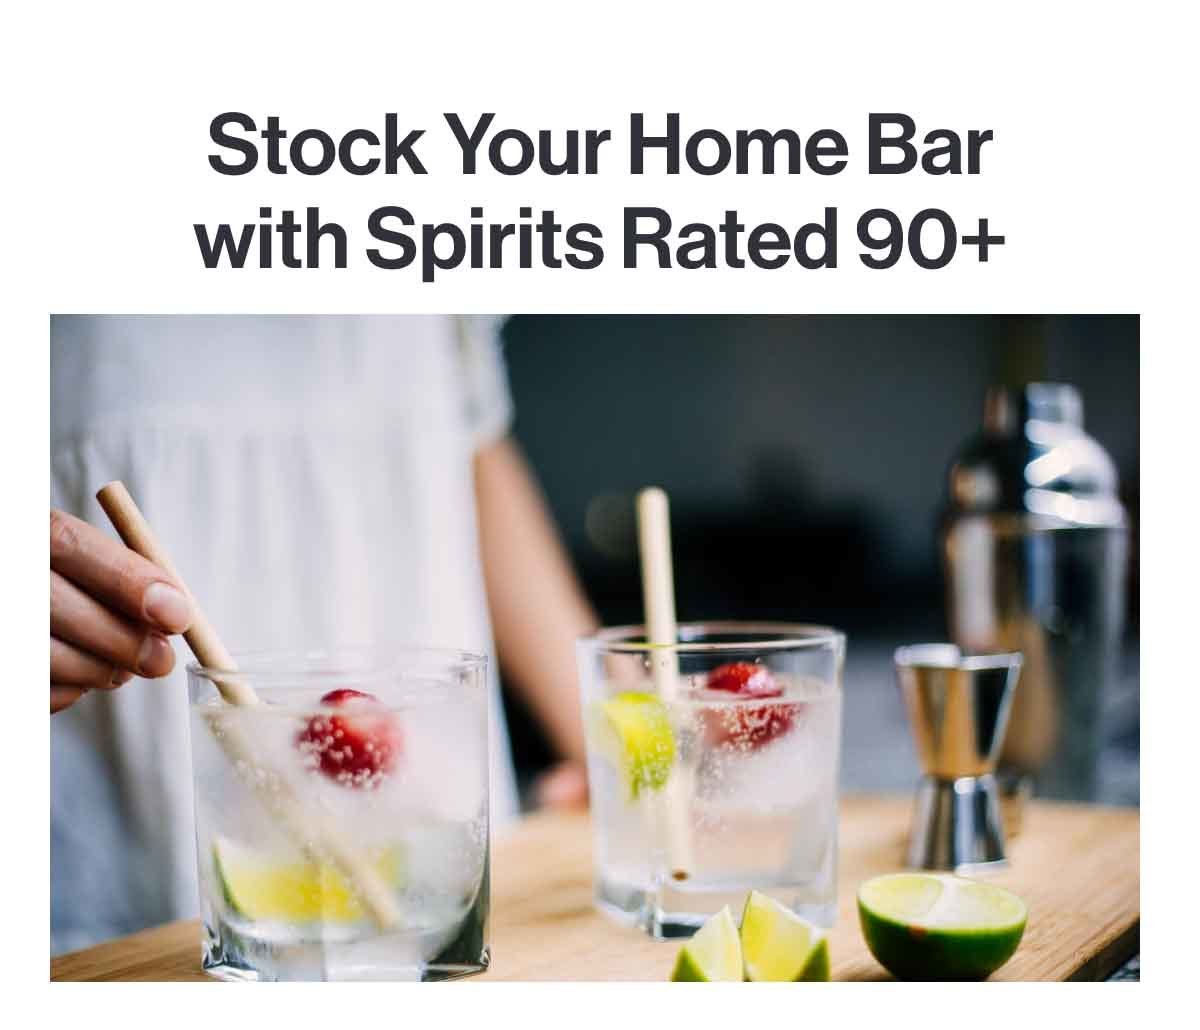 Stock your home bar with spirits rated 90+